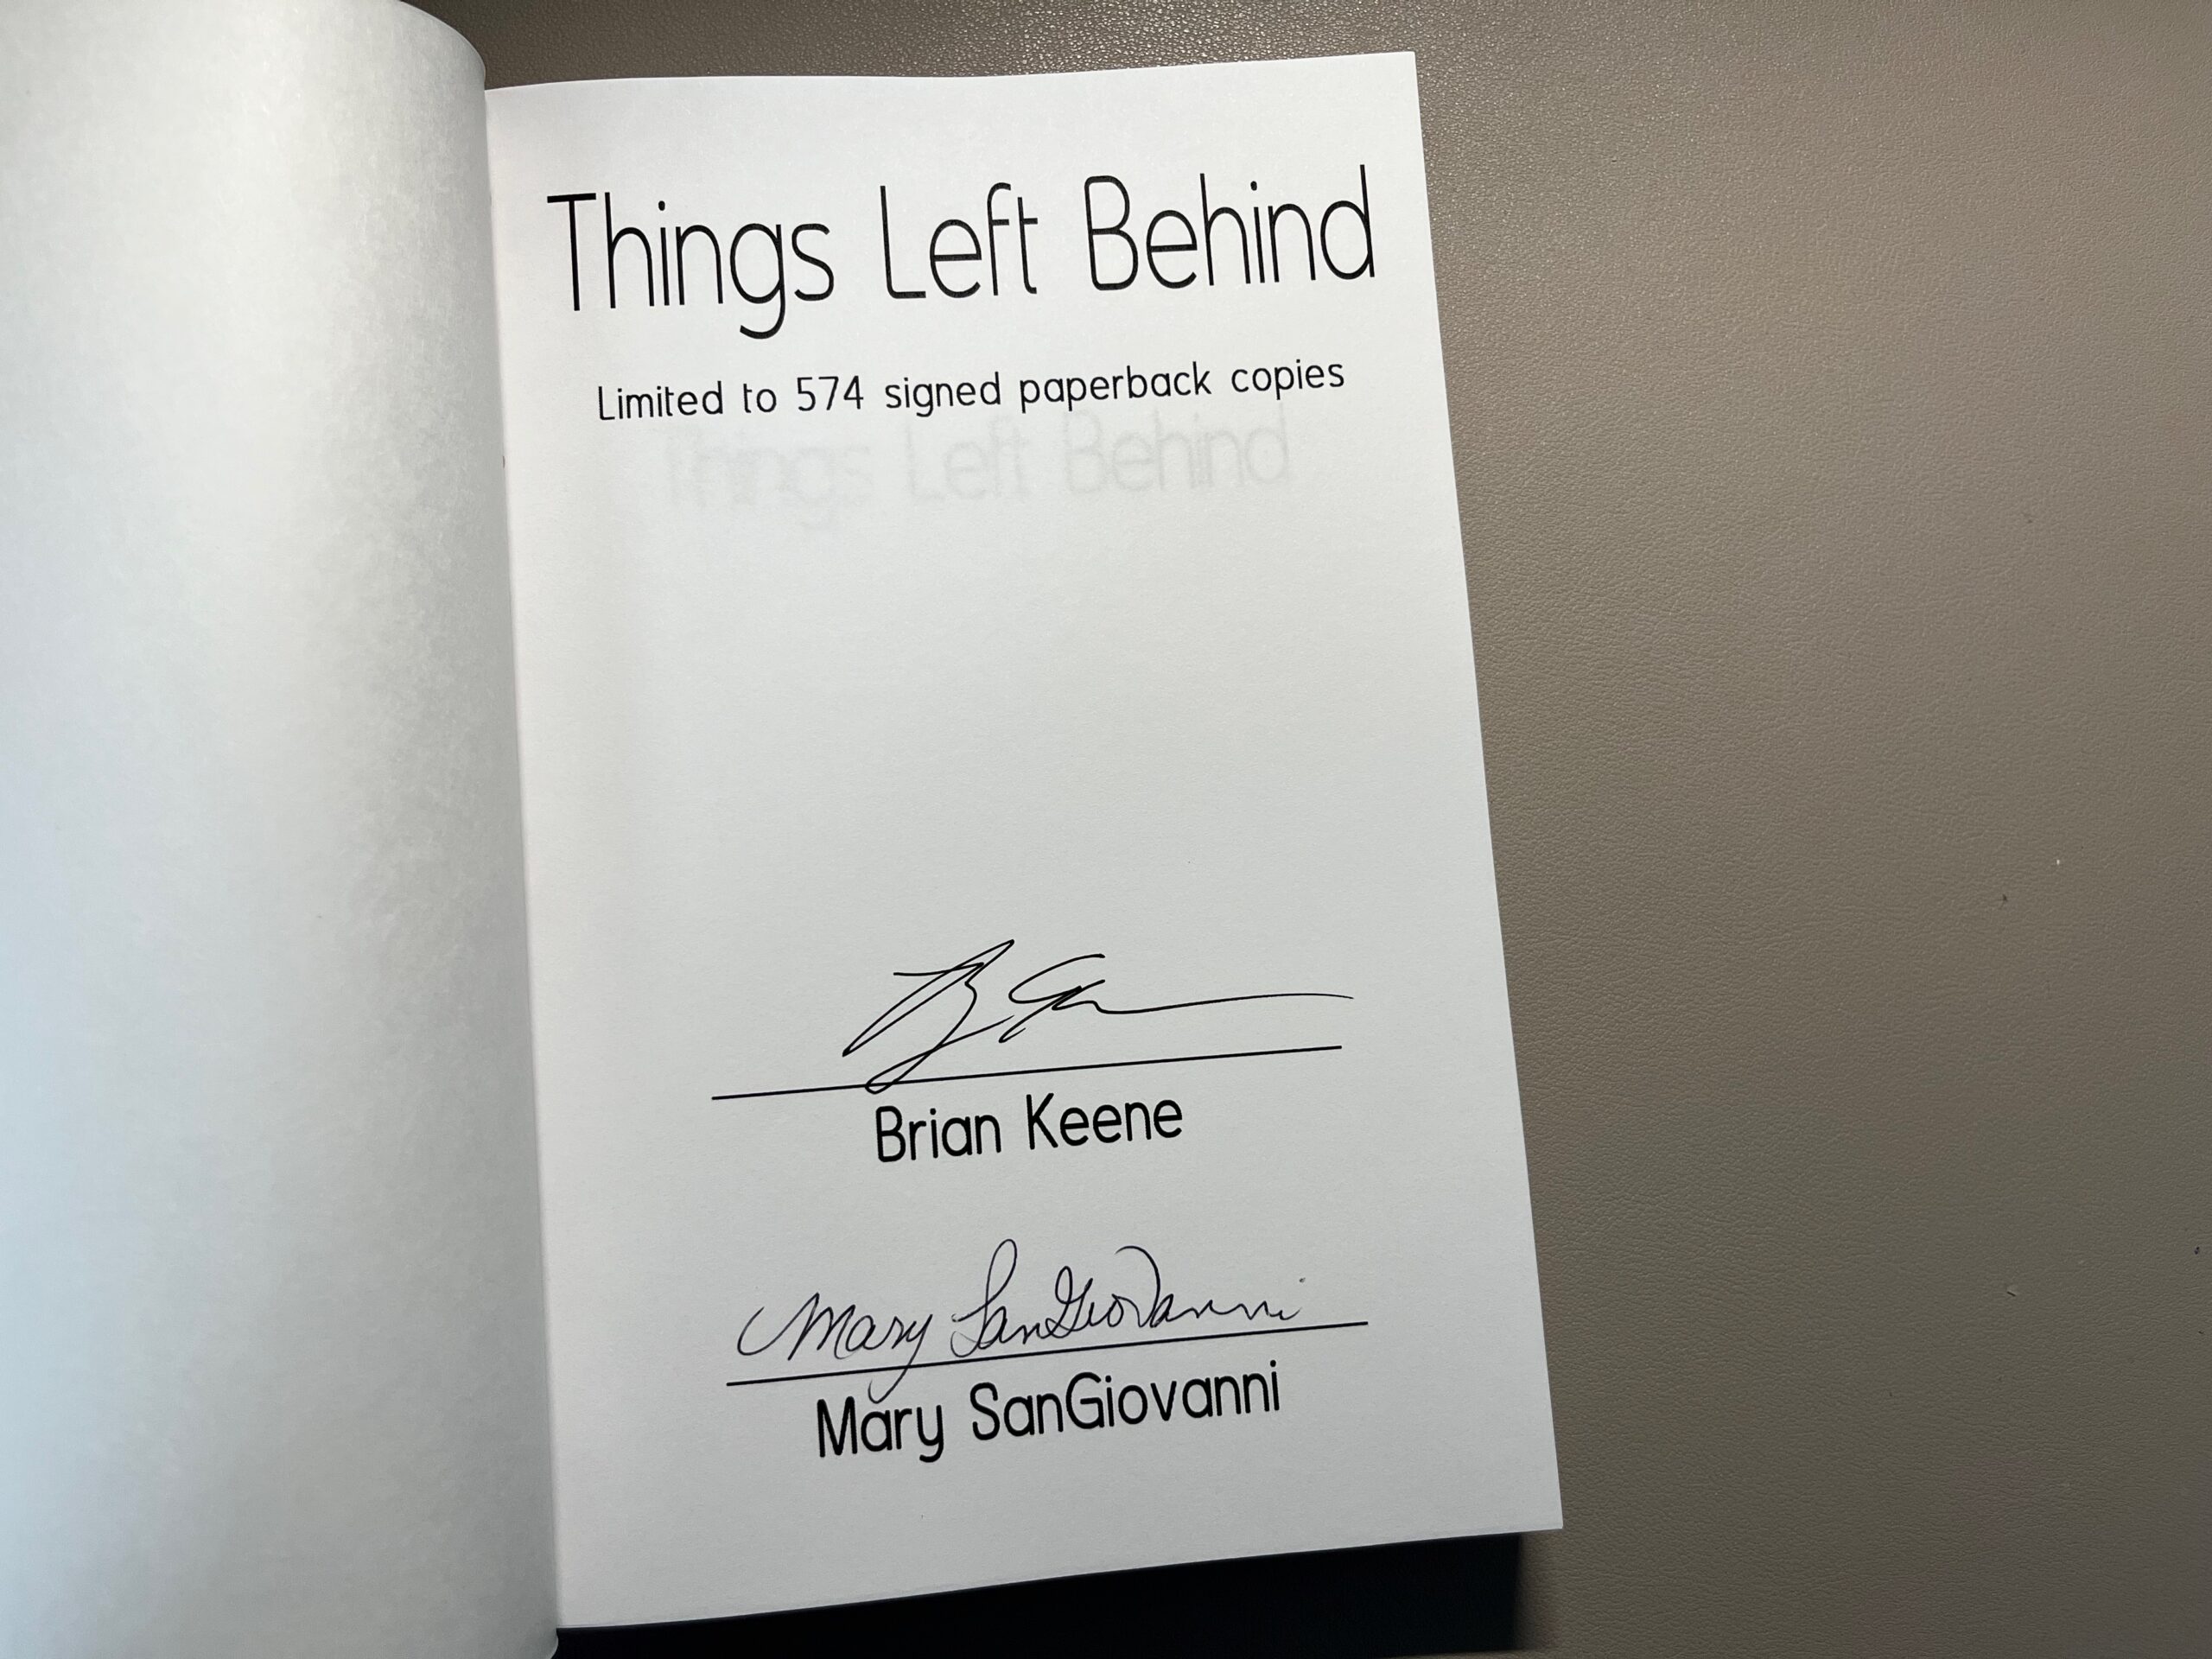 Things Left Behind by Brian Keene and Mary SanGiovanni signed copy